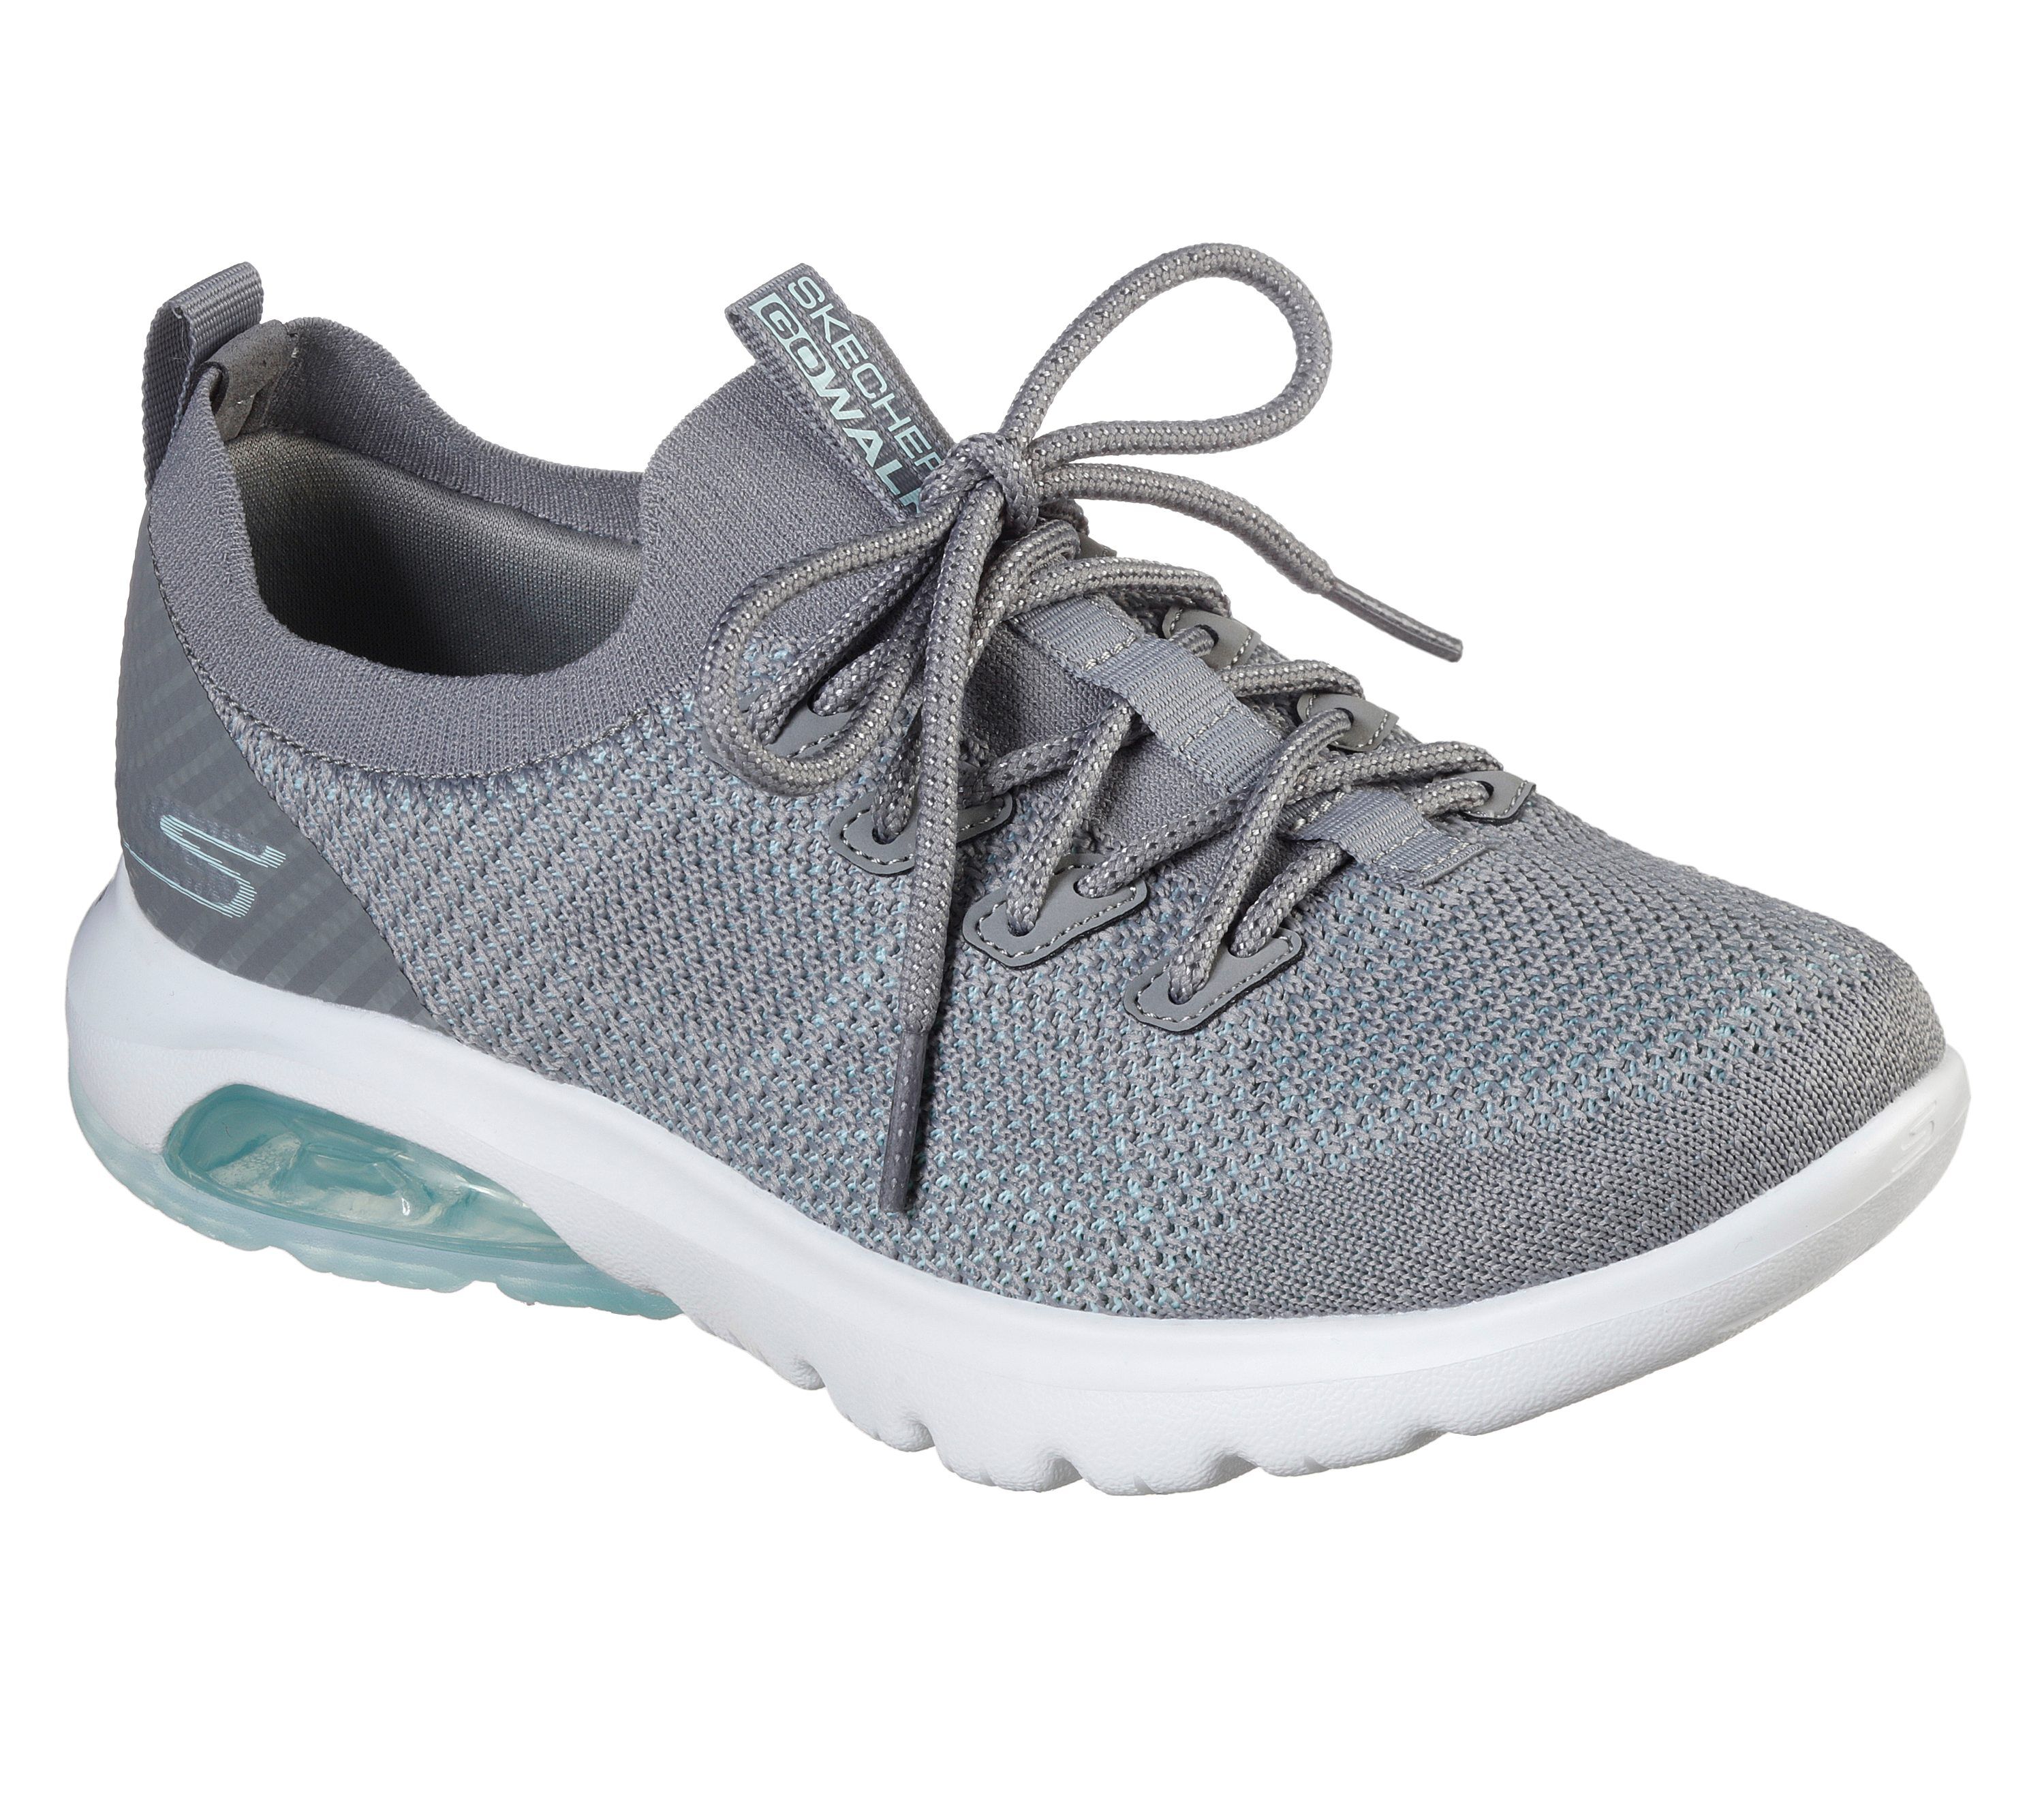 skechers clearance sale philippines